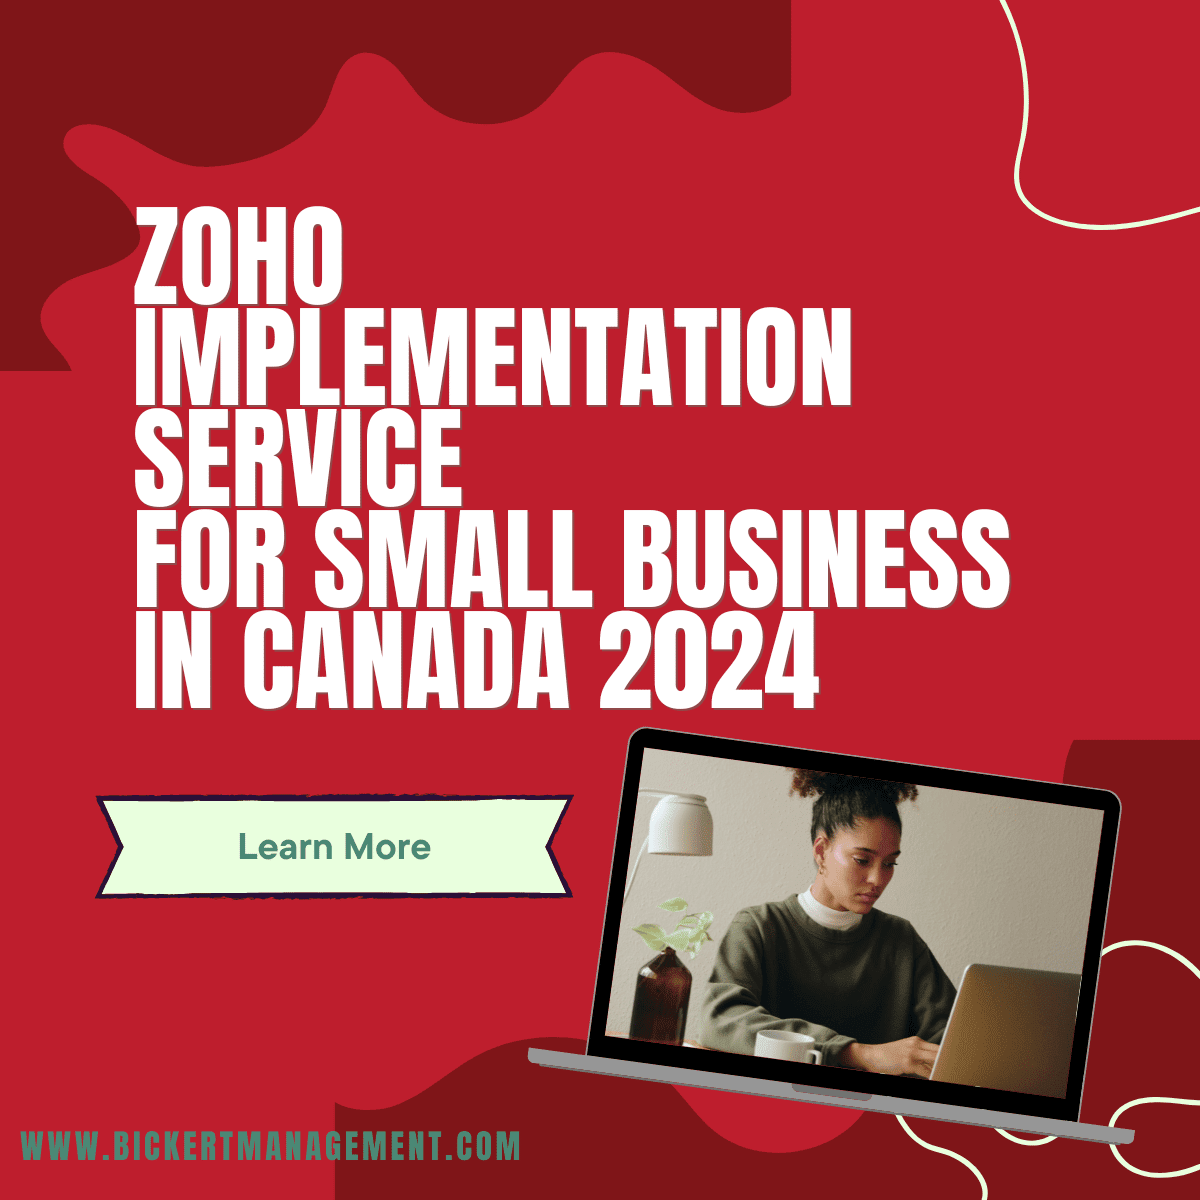 The Benefits of Zoho Implementation Service for Small Business in Canada 2024